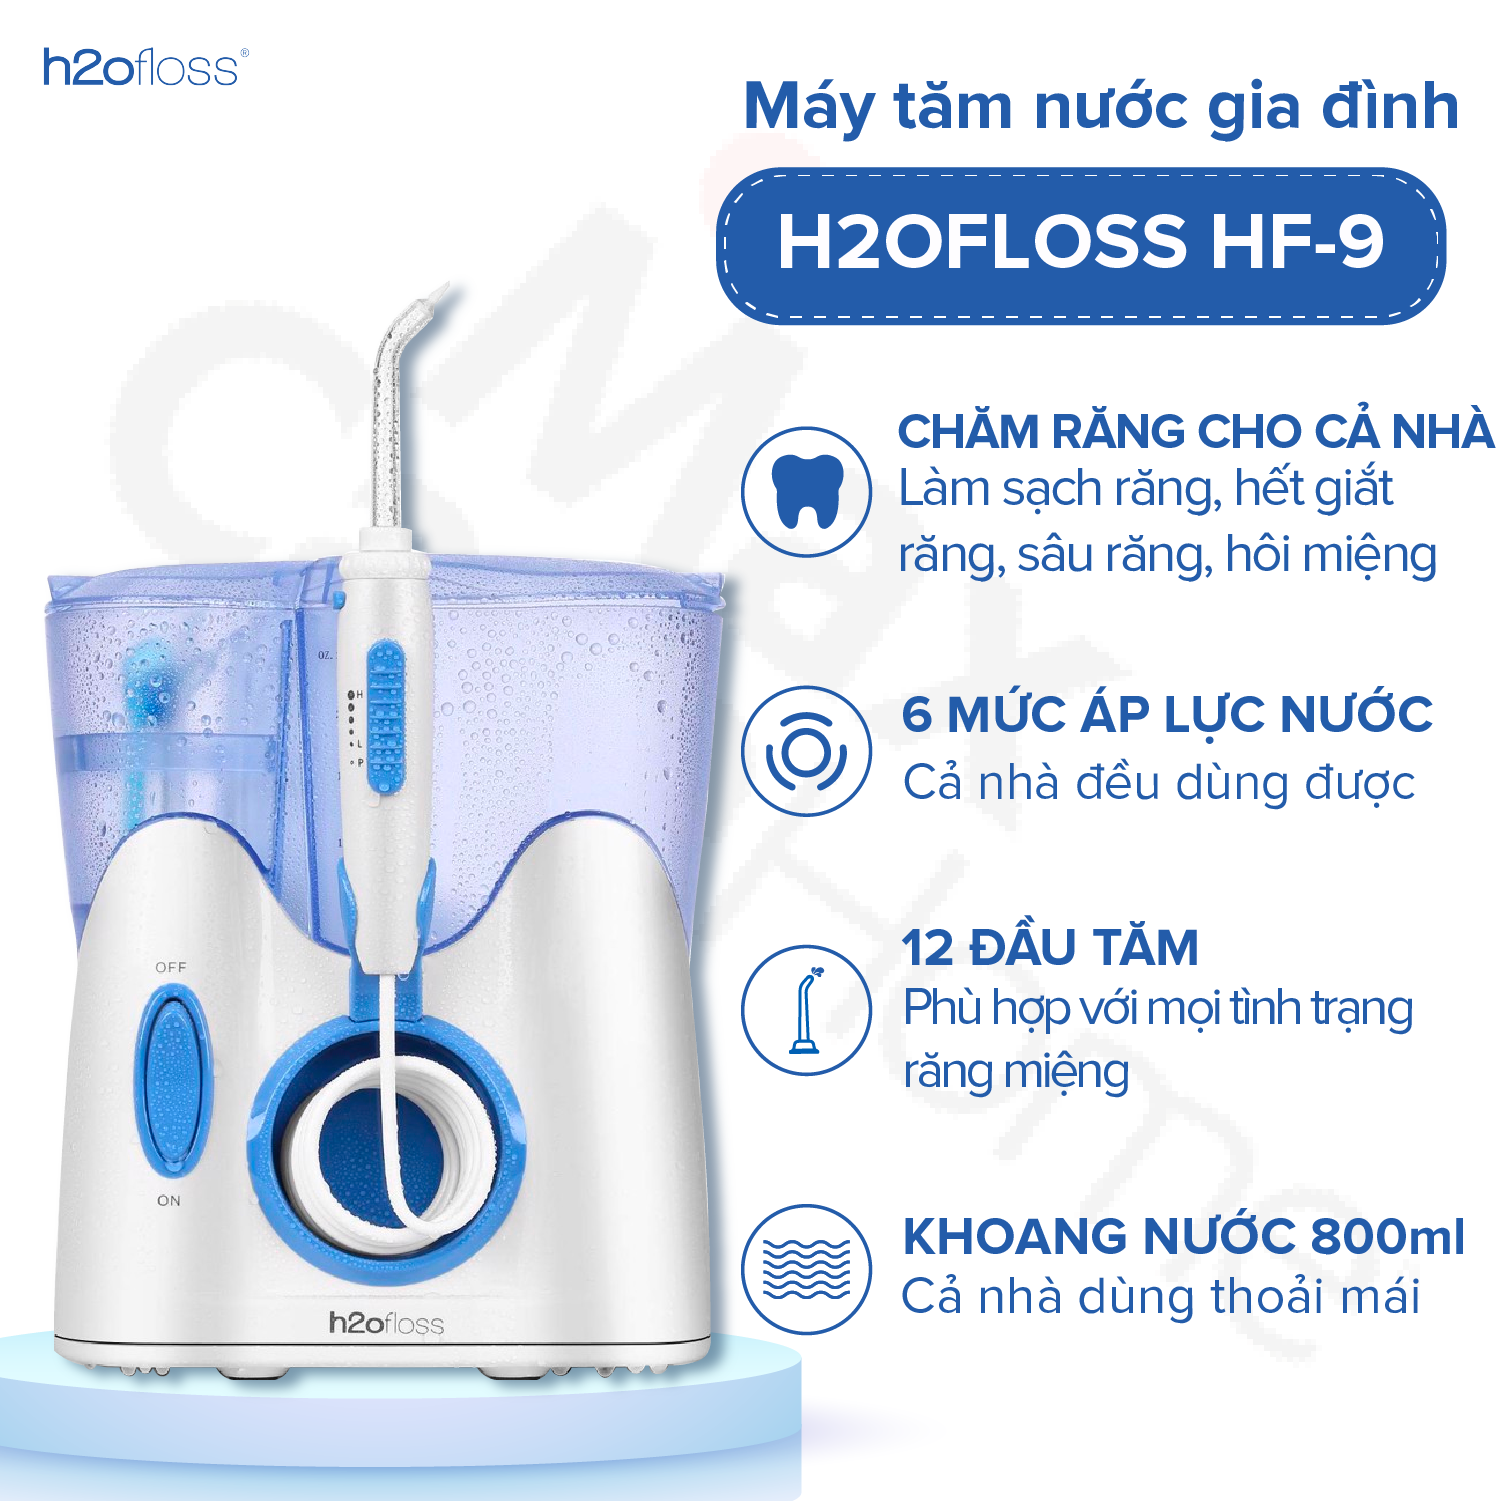 may-tam-nuoc-gia-dinh-h2oflos-hf9